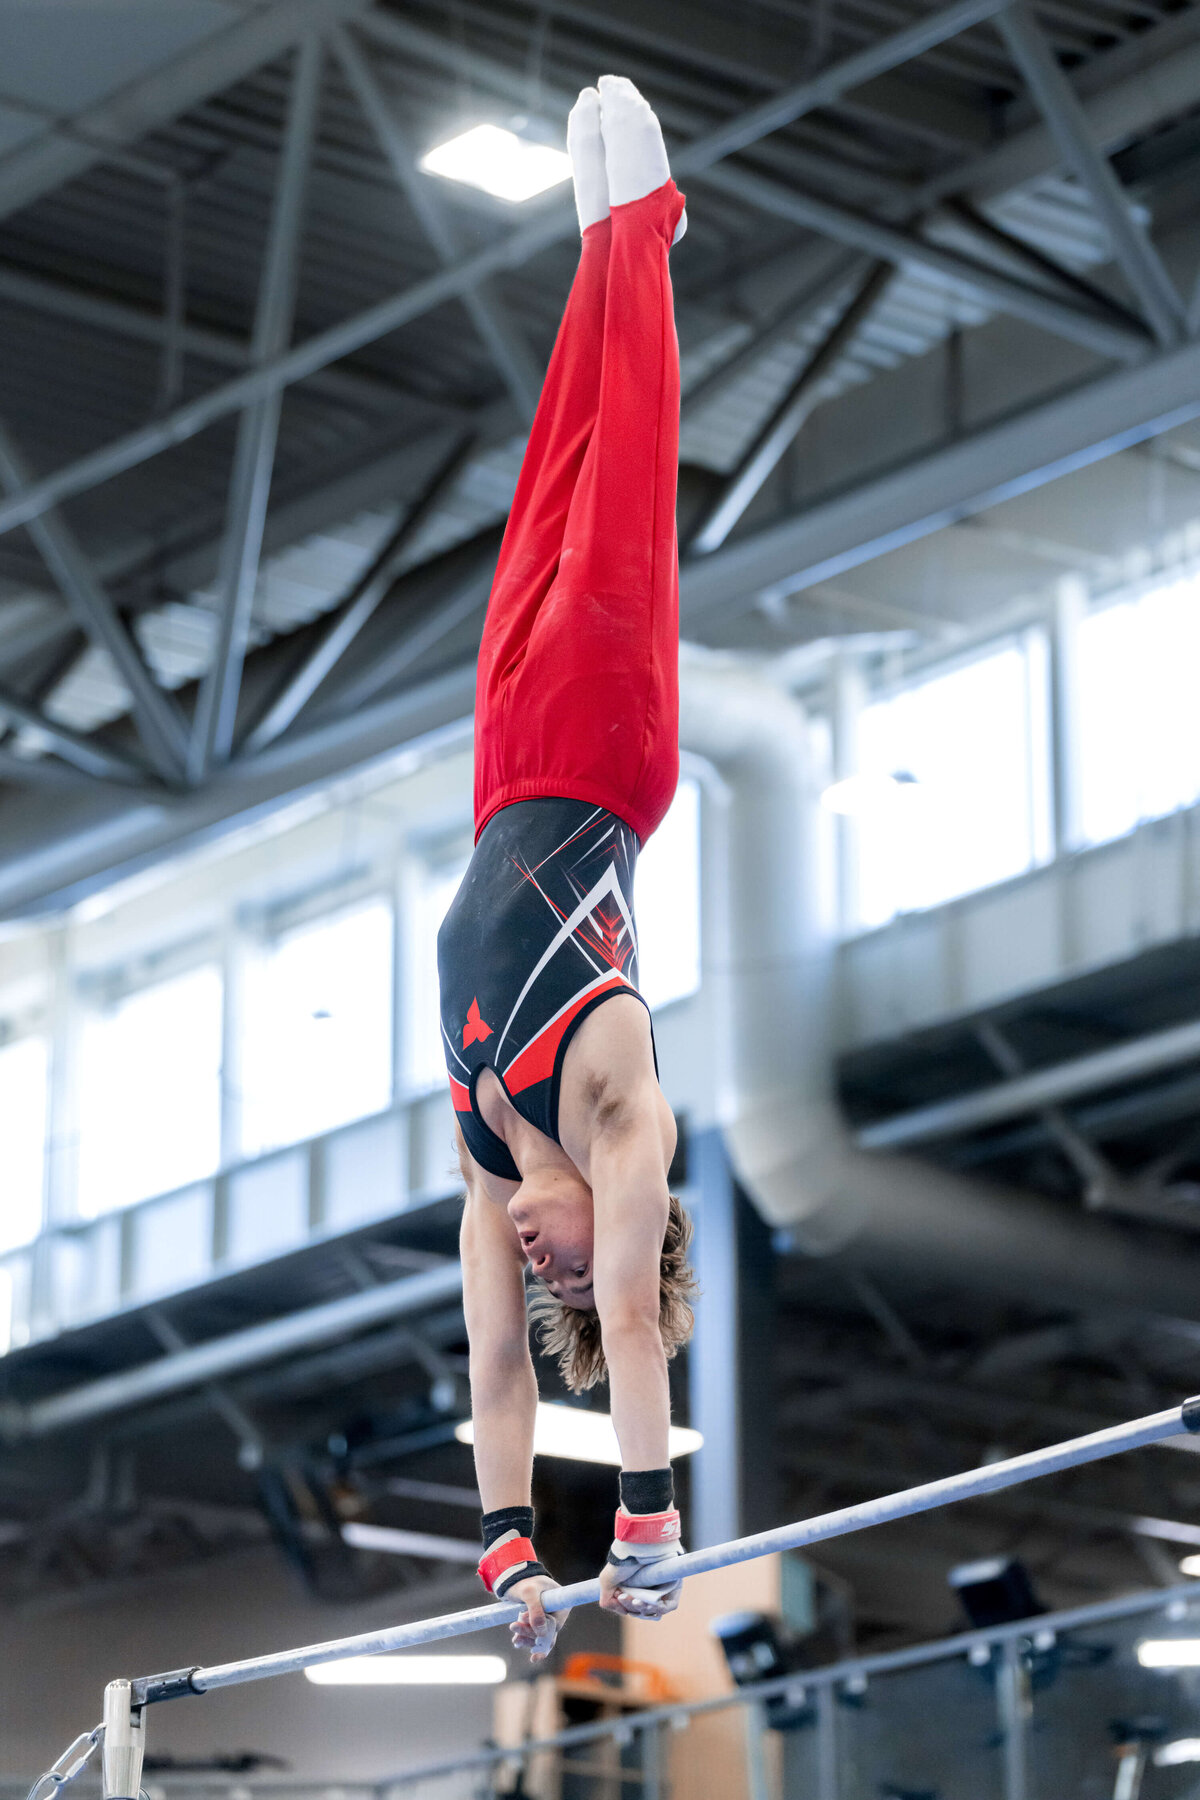 Photo by Luke O'Geil taken at the 2023 inaugural Grizzly Classic men's artistic gymnastics competitionA1_02678